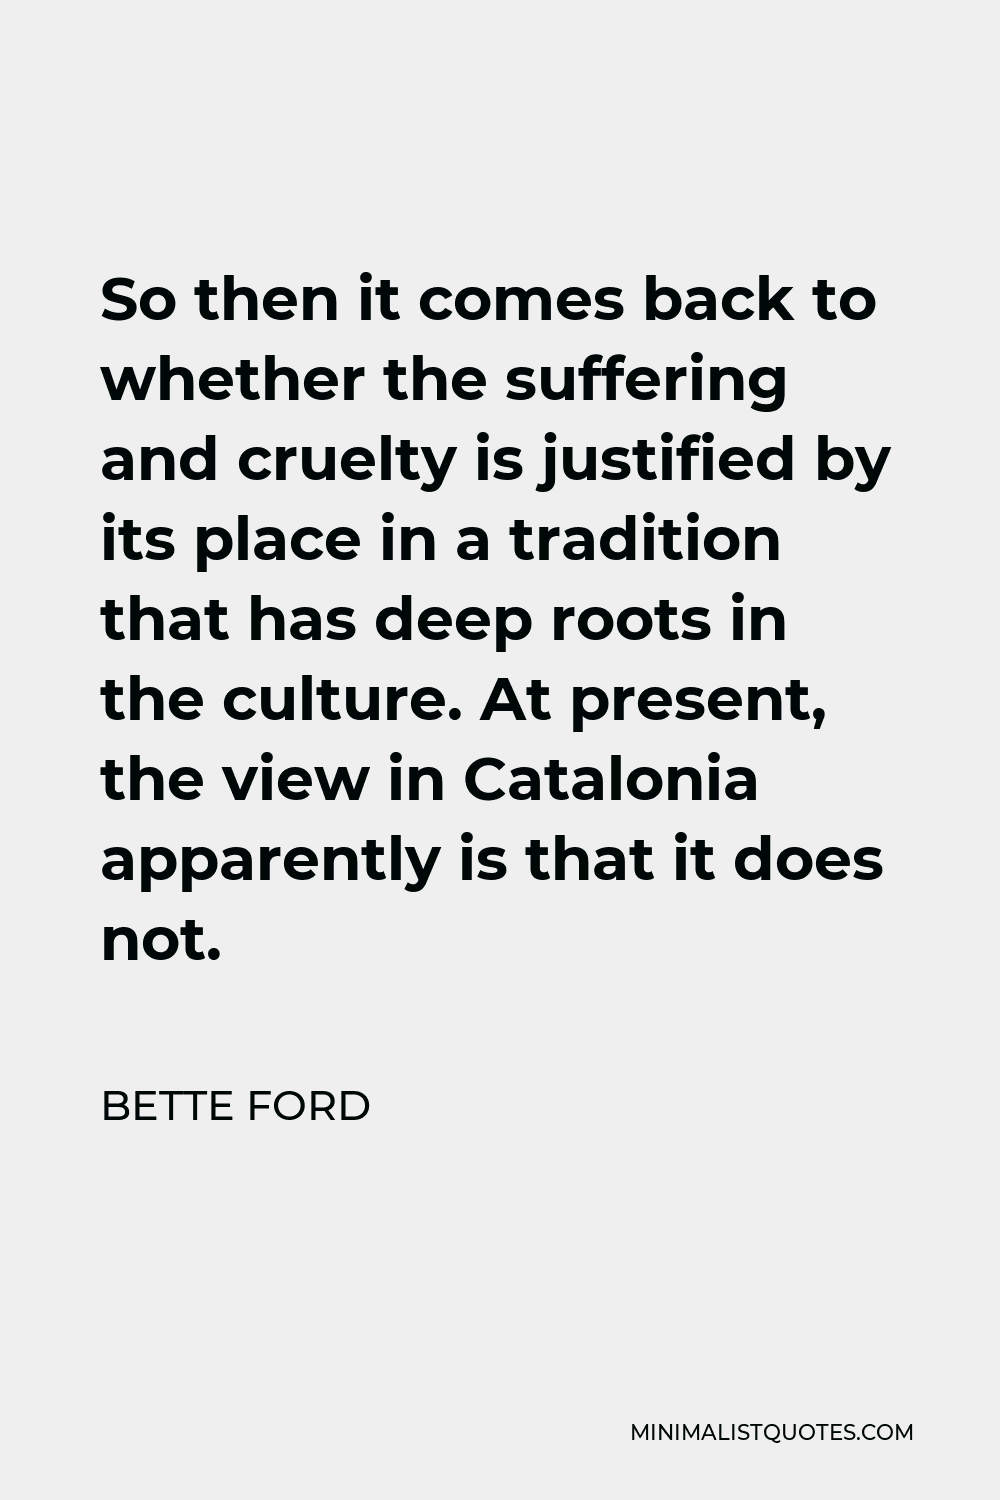 Bette Ford Quote - So then it comes back to whether the suffering and cruelty is justified by its place in a tradition that has deep roots in the culture. At present, the view in Catalonia apparently is that it does not.